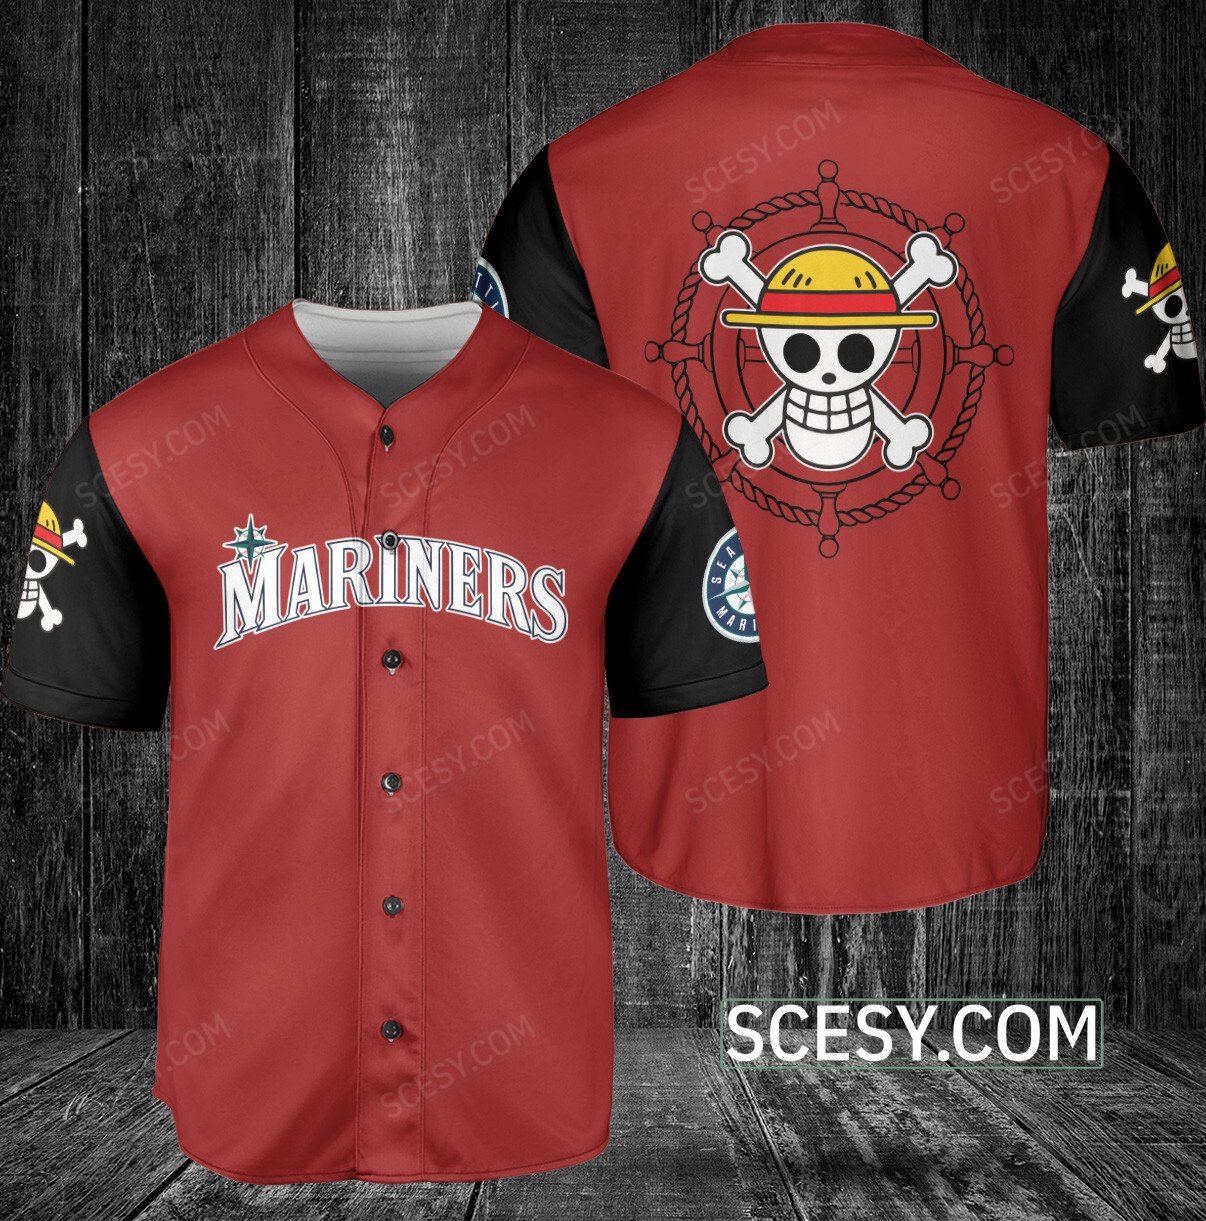 mariners red and black uniforms